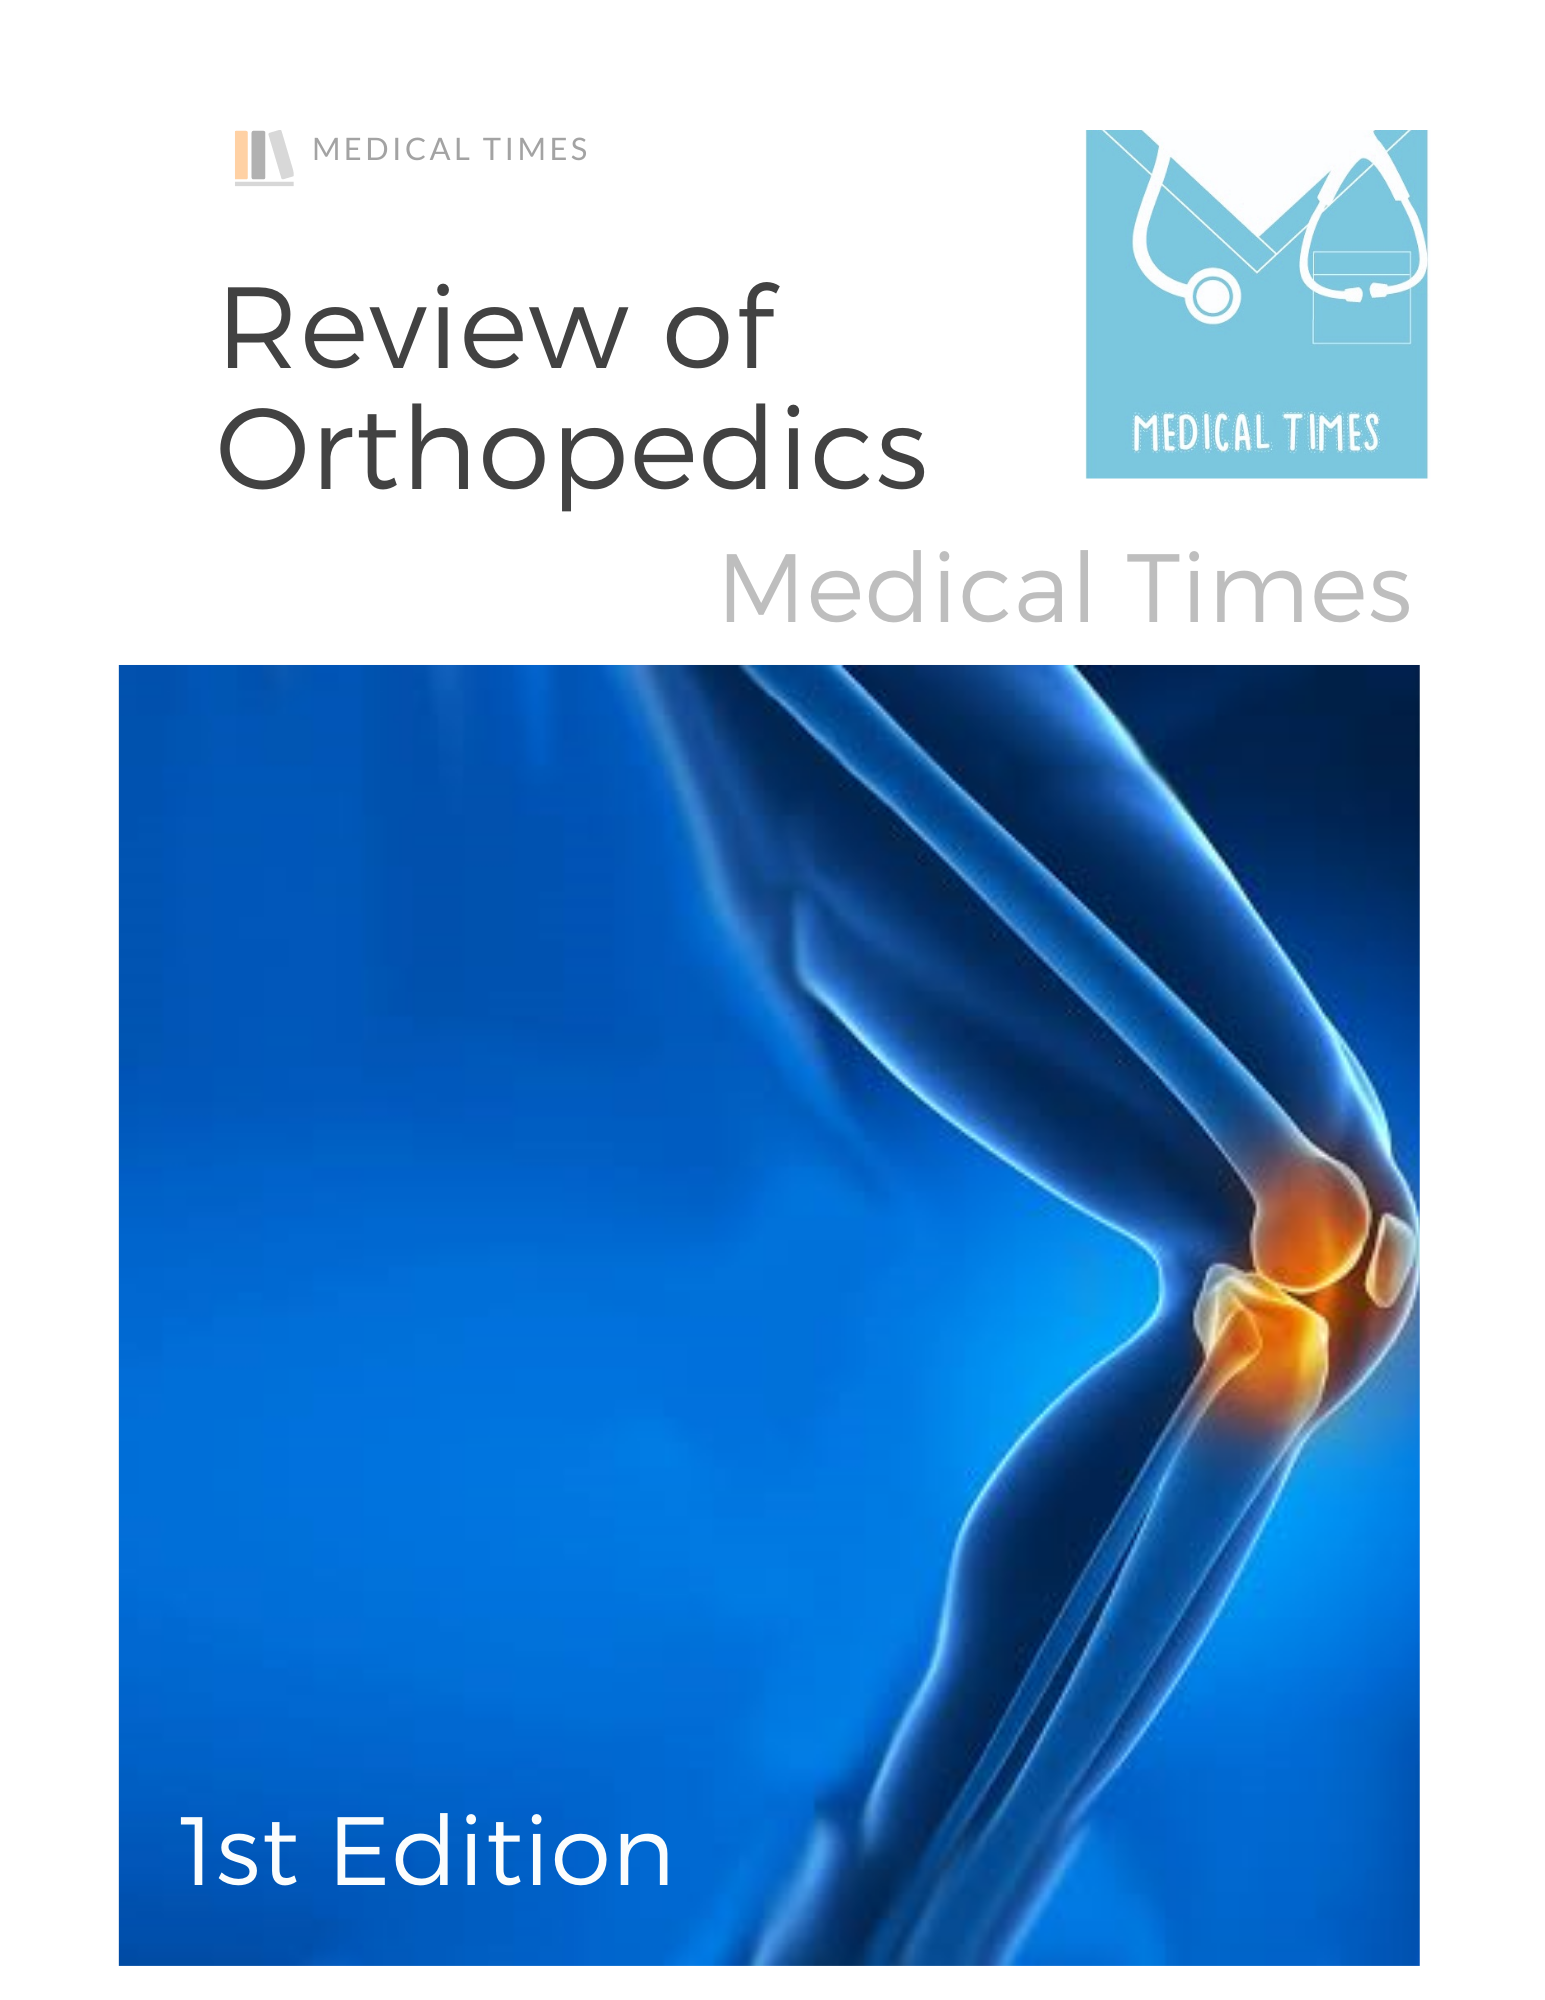 thesis topic for orthopaedics